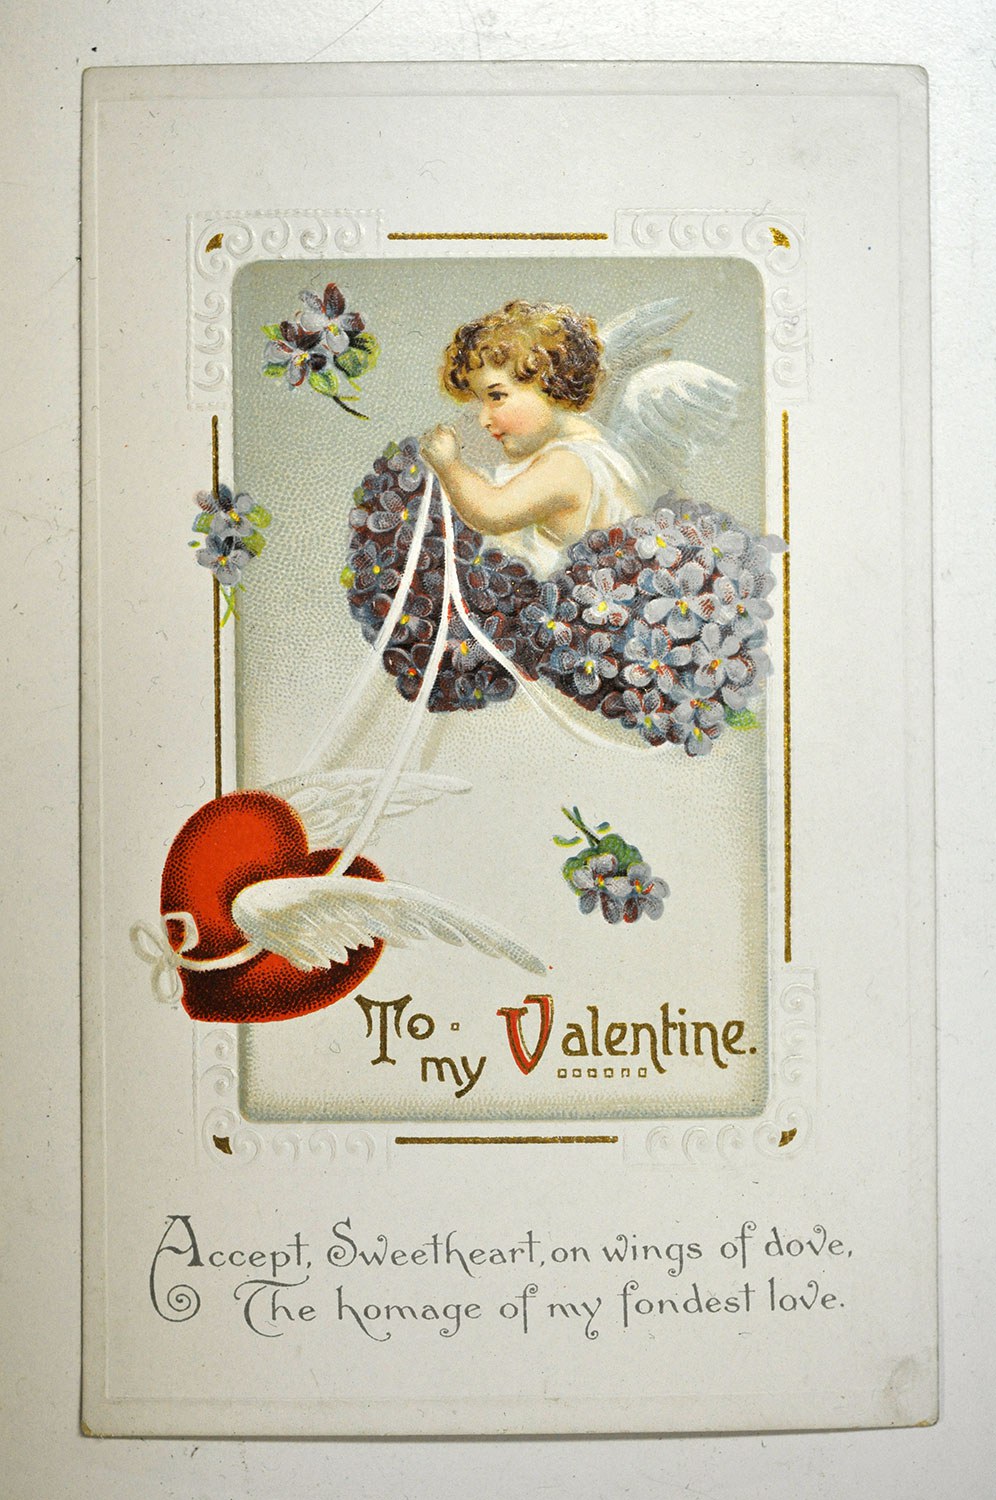 Valentine sent to Dorothy Ashbridge in 1914 from her friend Norma